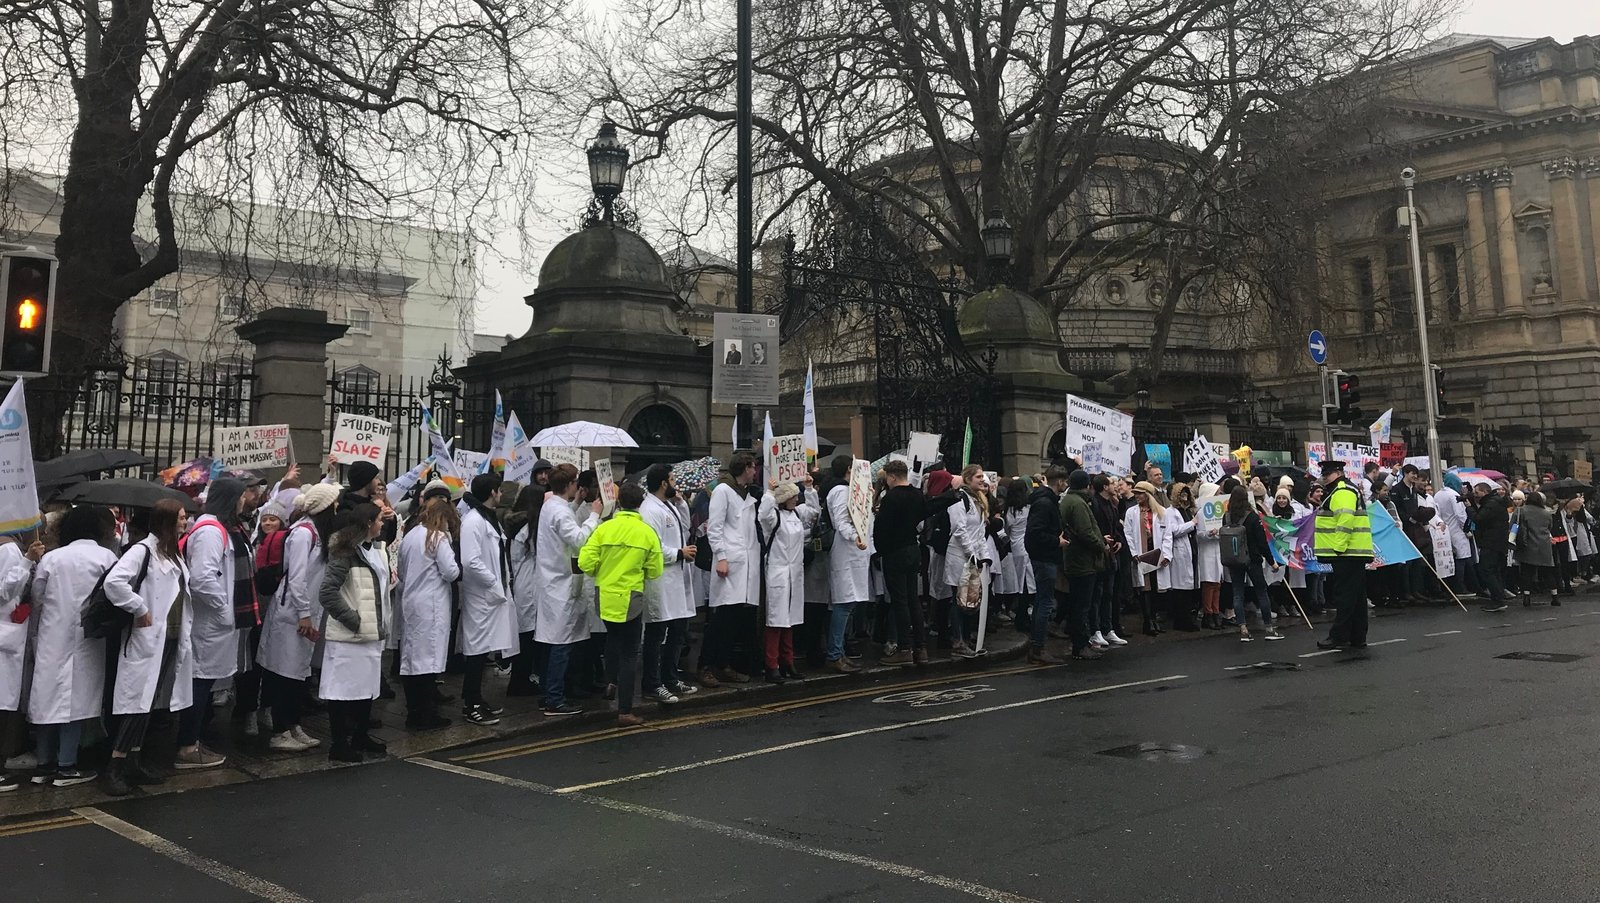 Pharmacy students protest over internship pay 'ban'